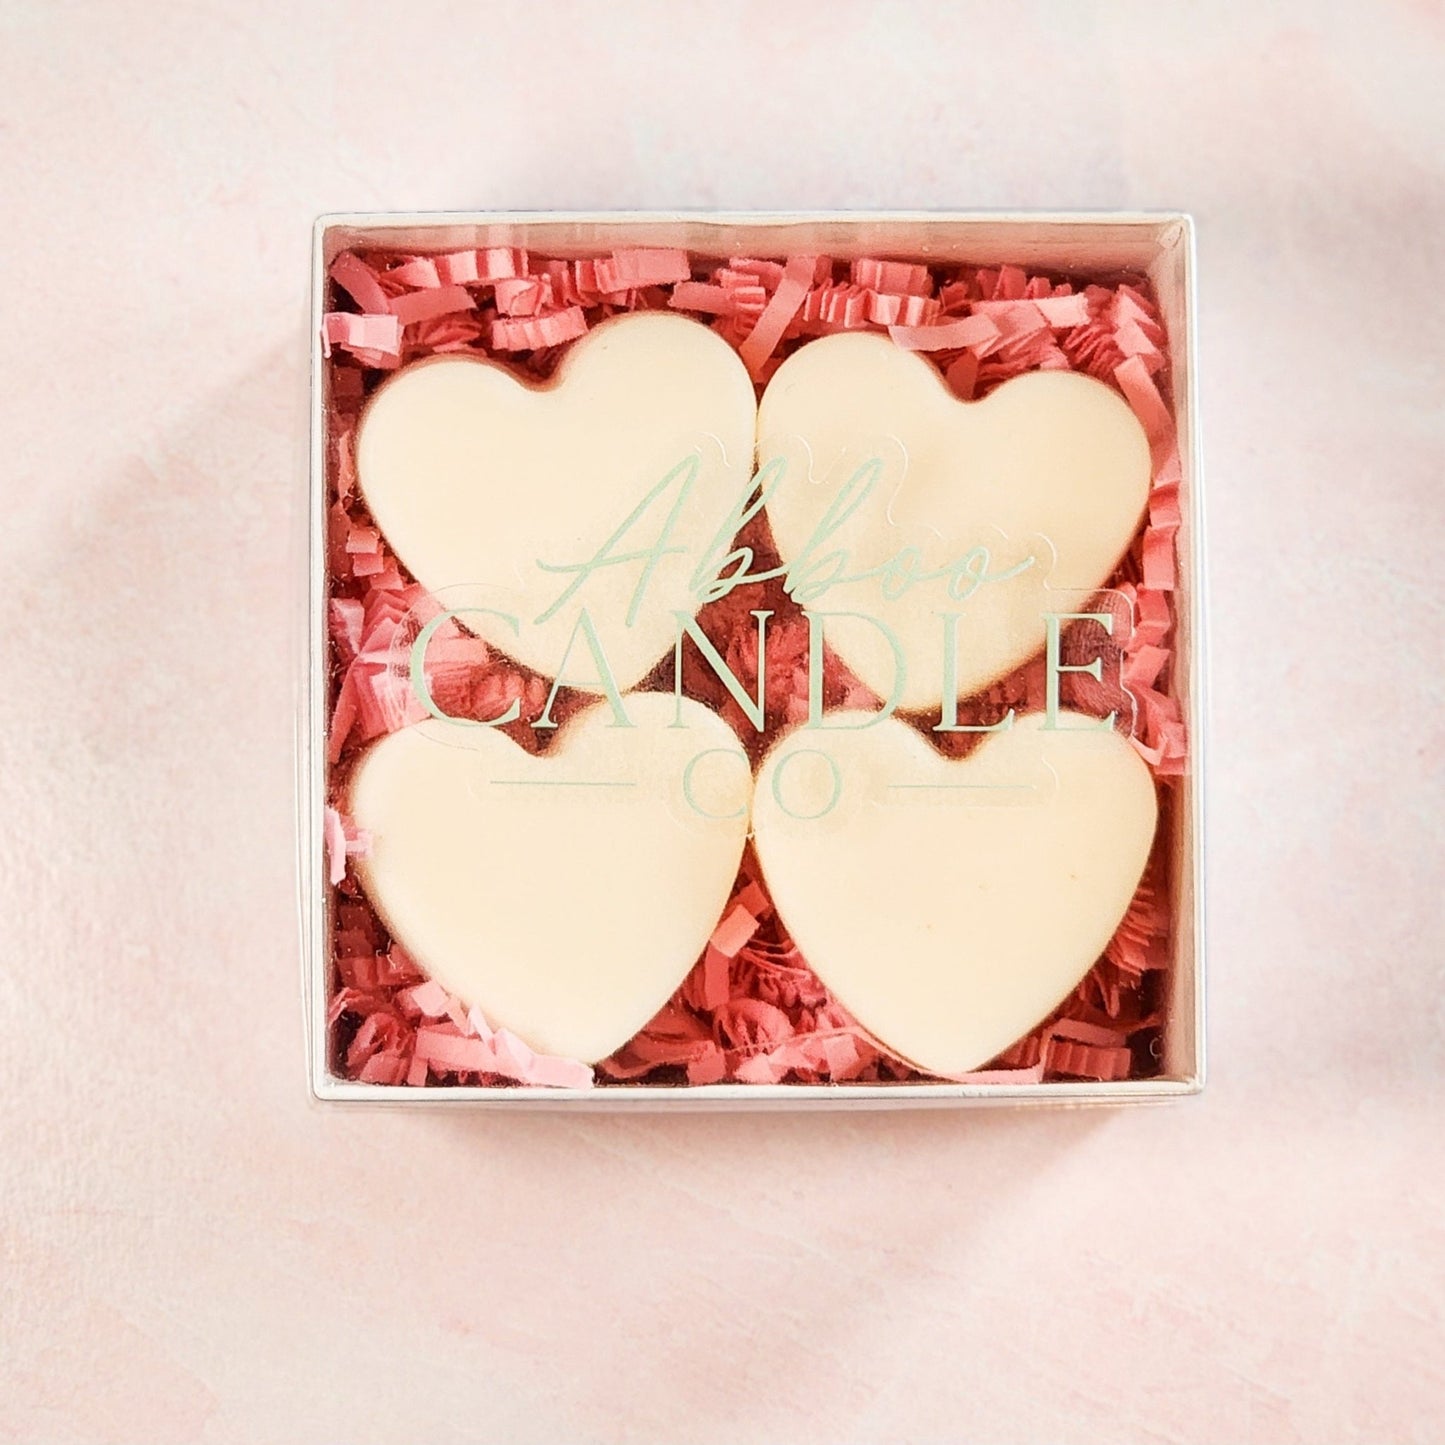 Heart Shaped Soy Wax Melts - Abboo Candle Co